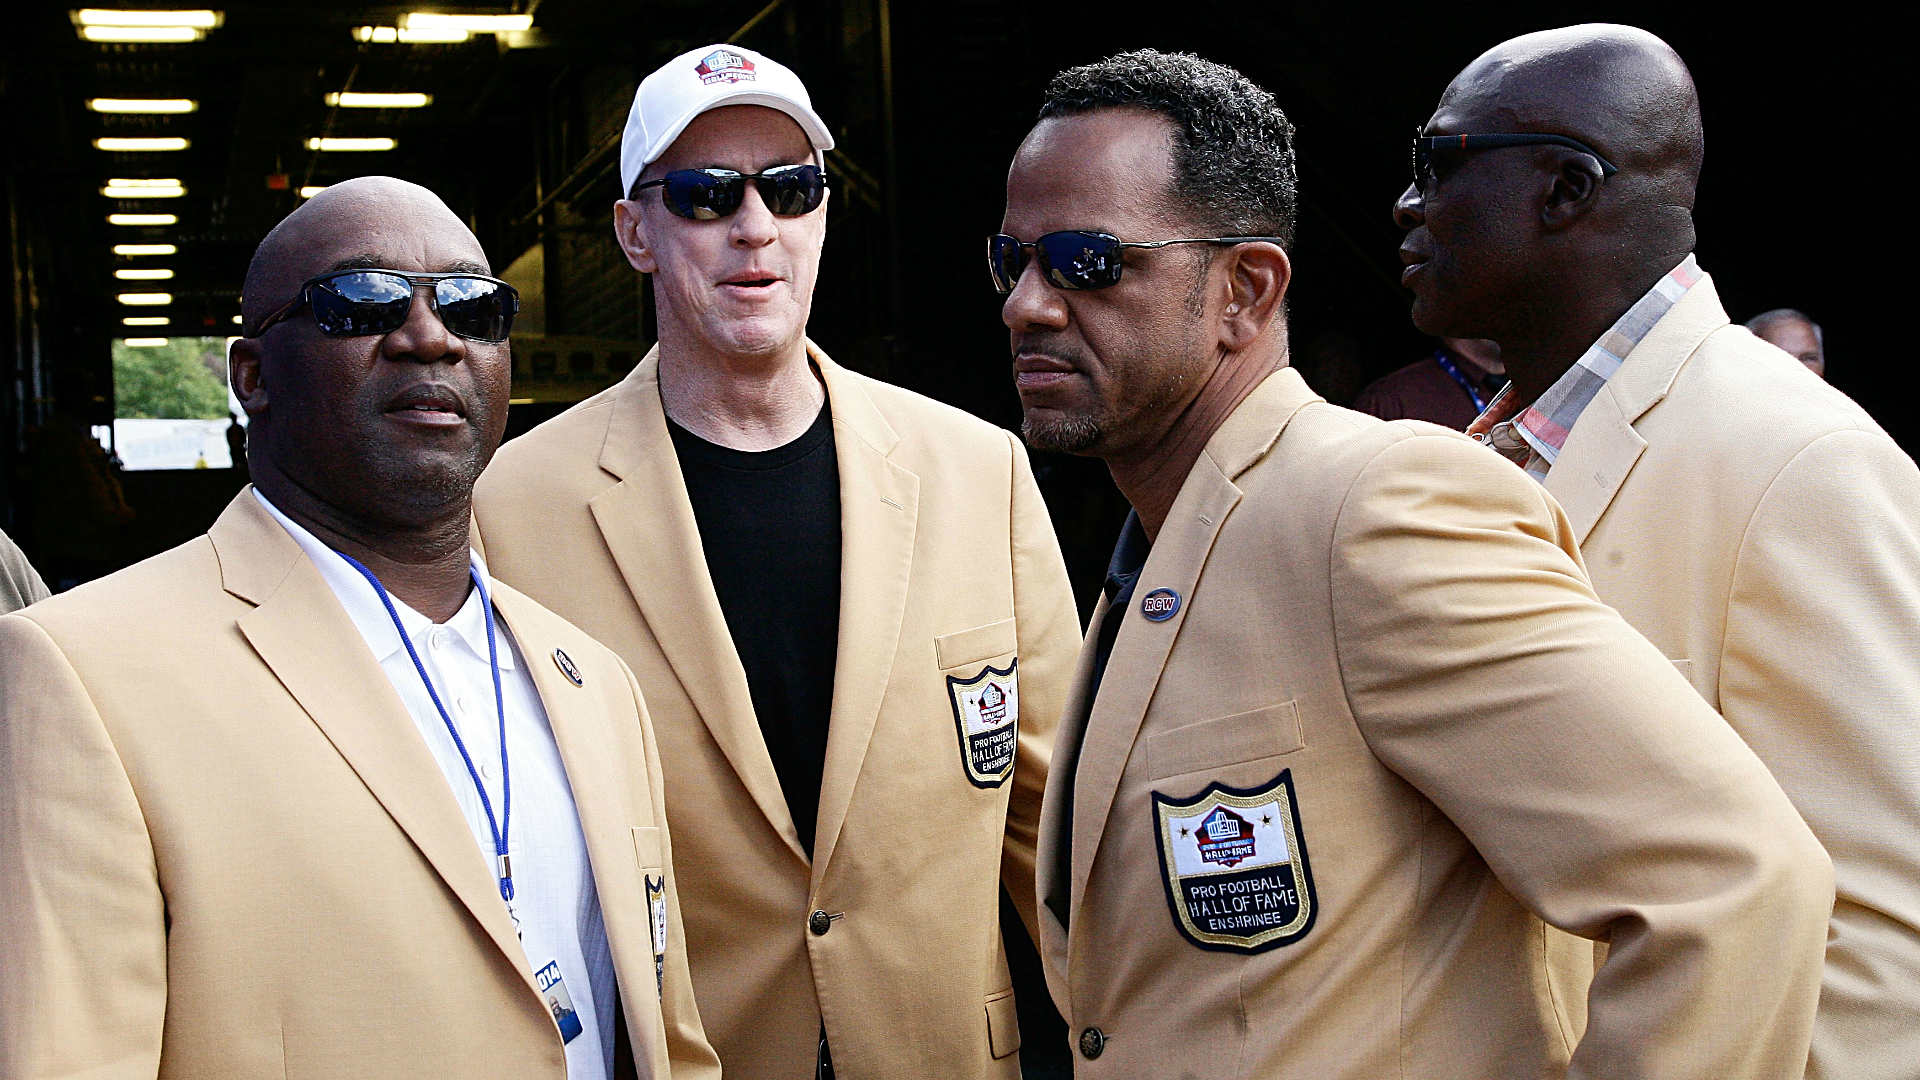 Draped in gold jackets, Pro Football Hall of Famers describe being